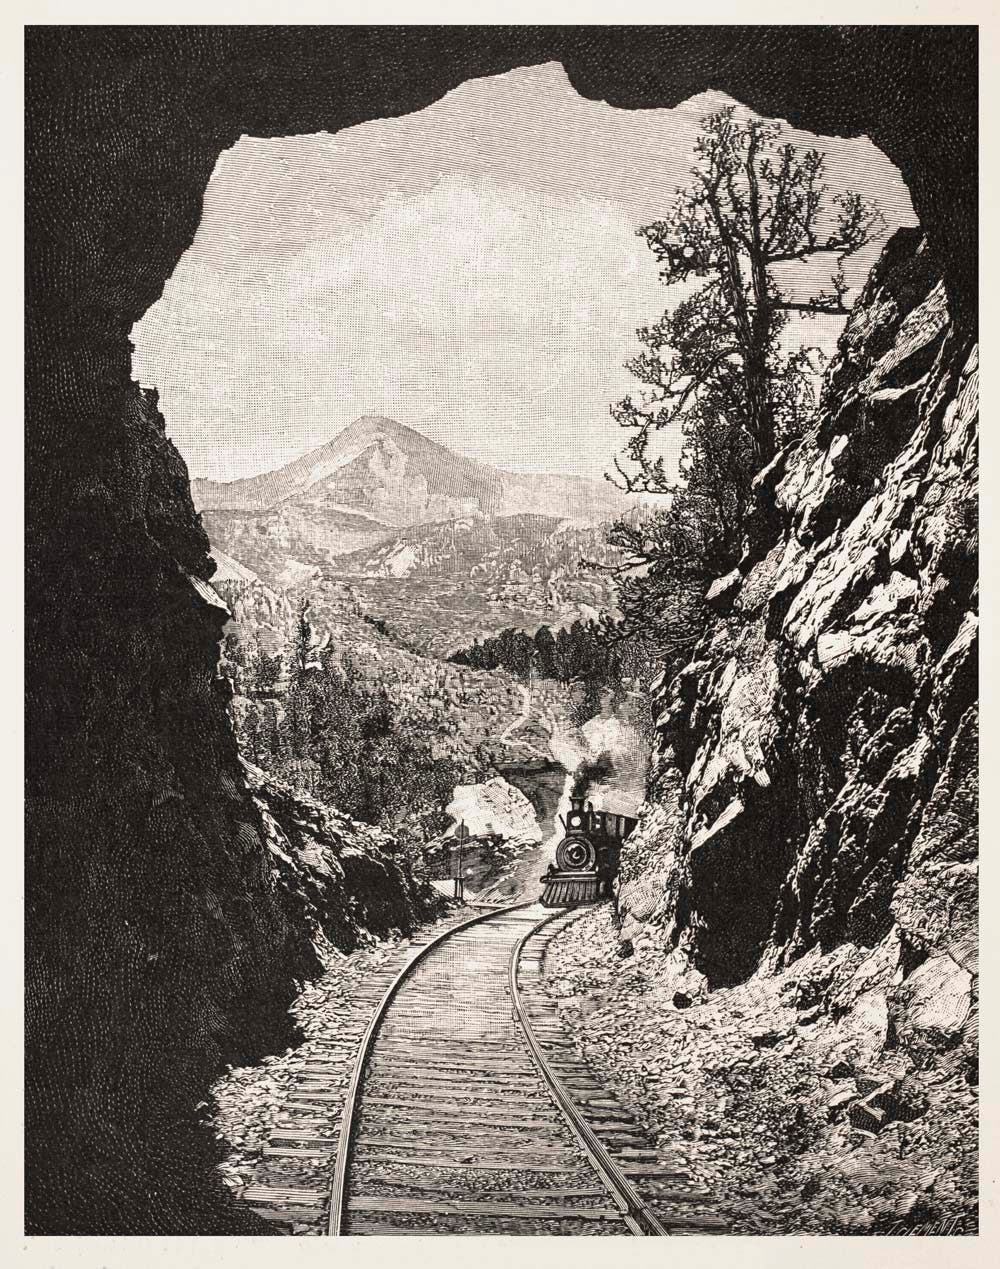 The 15 tunnels along the Central Pacific line required massive amounts of explosives to blast through solid granite. In addition to nitroglycerin produced on-site, crews used as many as 500 kegs of black powder a day during the construction phase through the Sierra Nevadas.